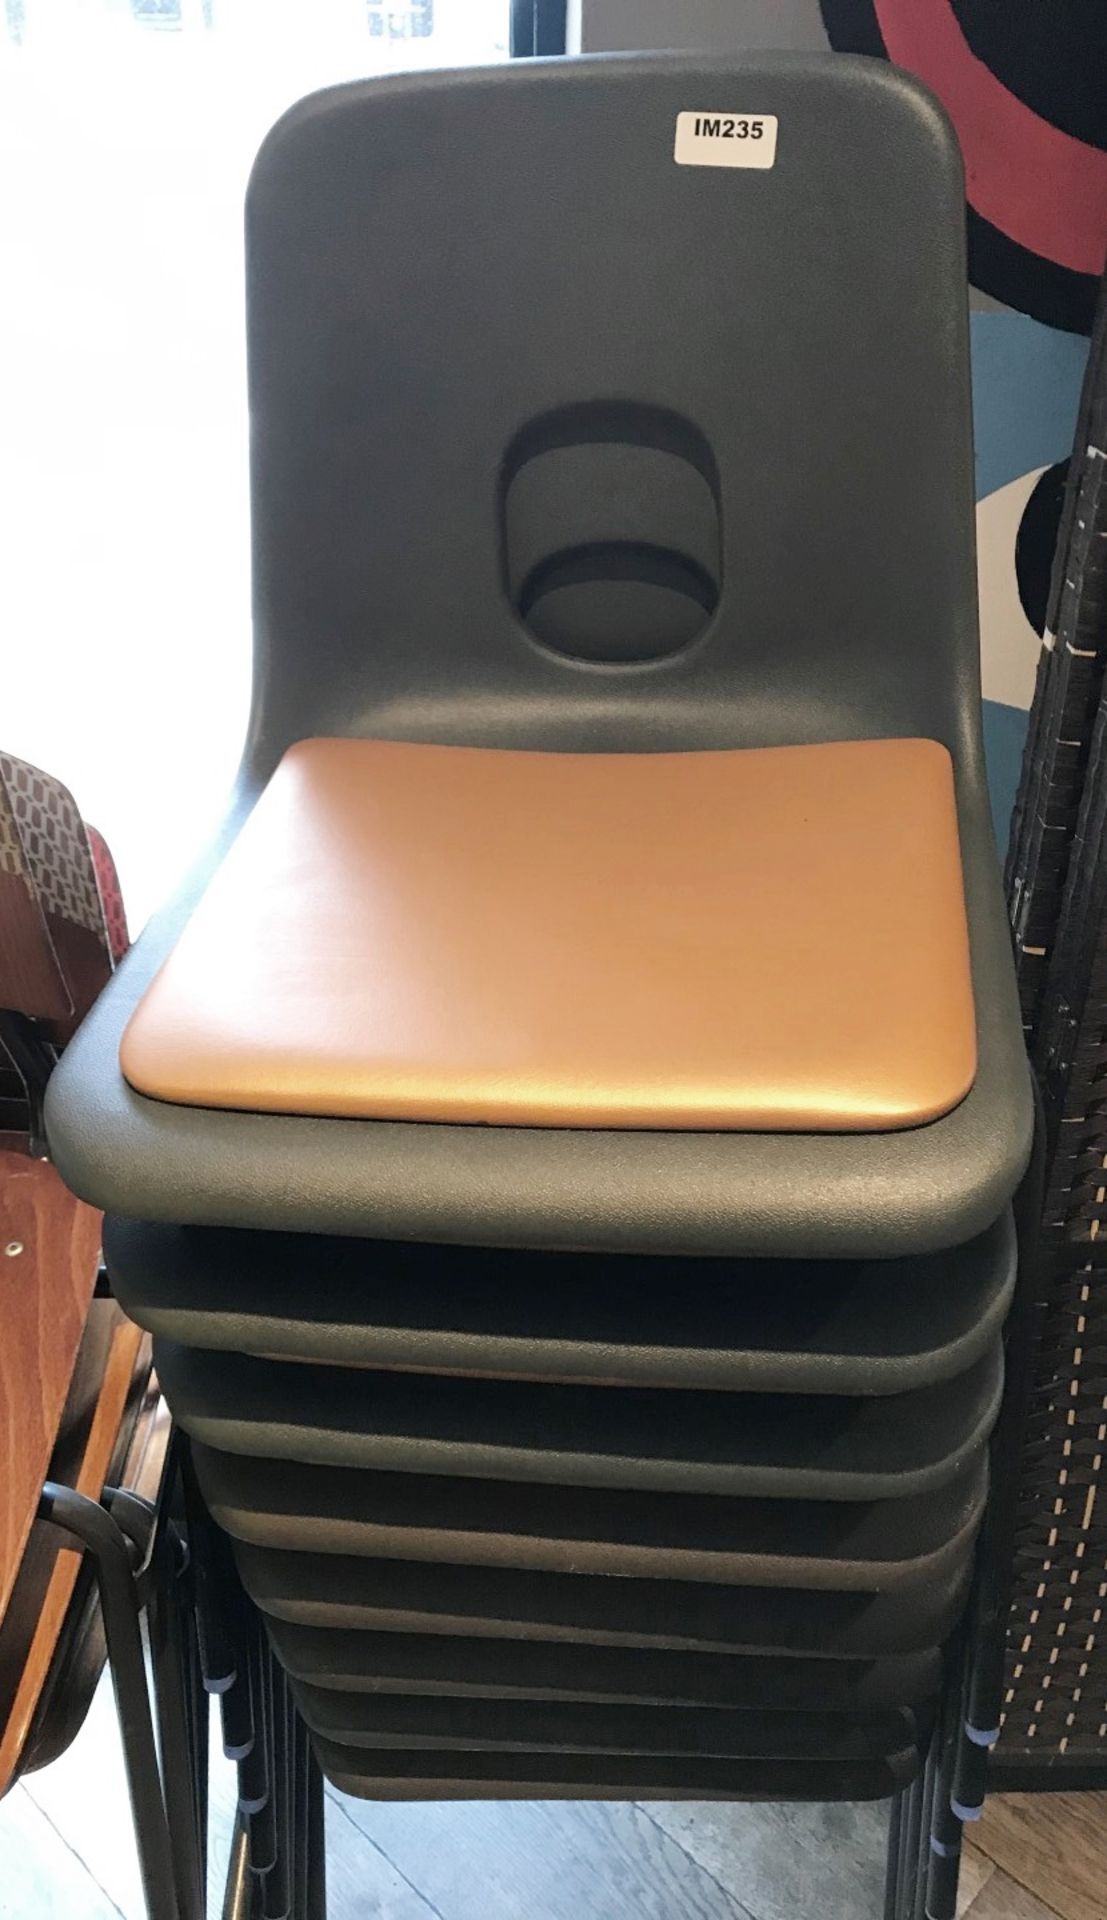 8 x Stackable Chairs With Padded Seats - CL554 - Ref IM235 - Location: Altrincham WA14